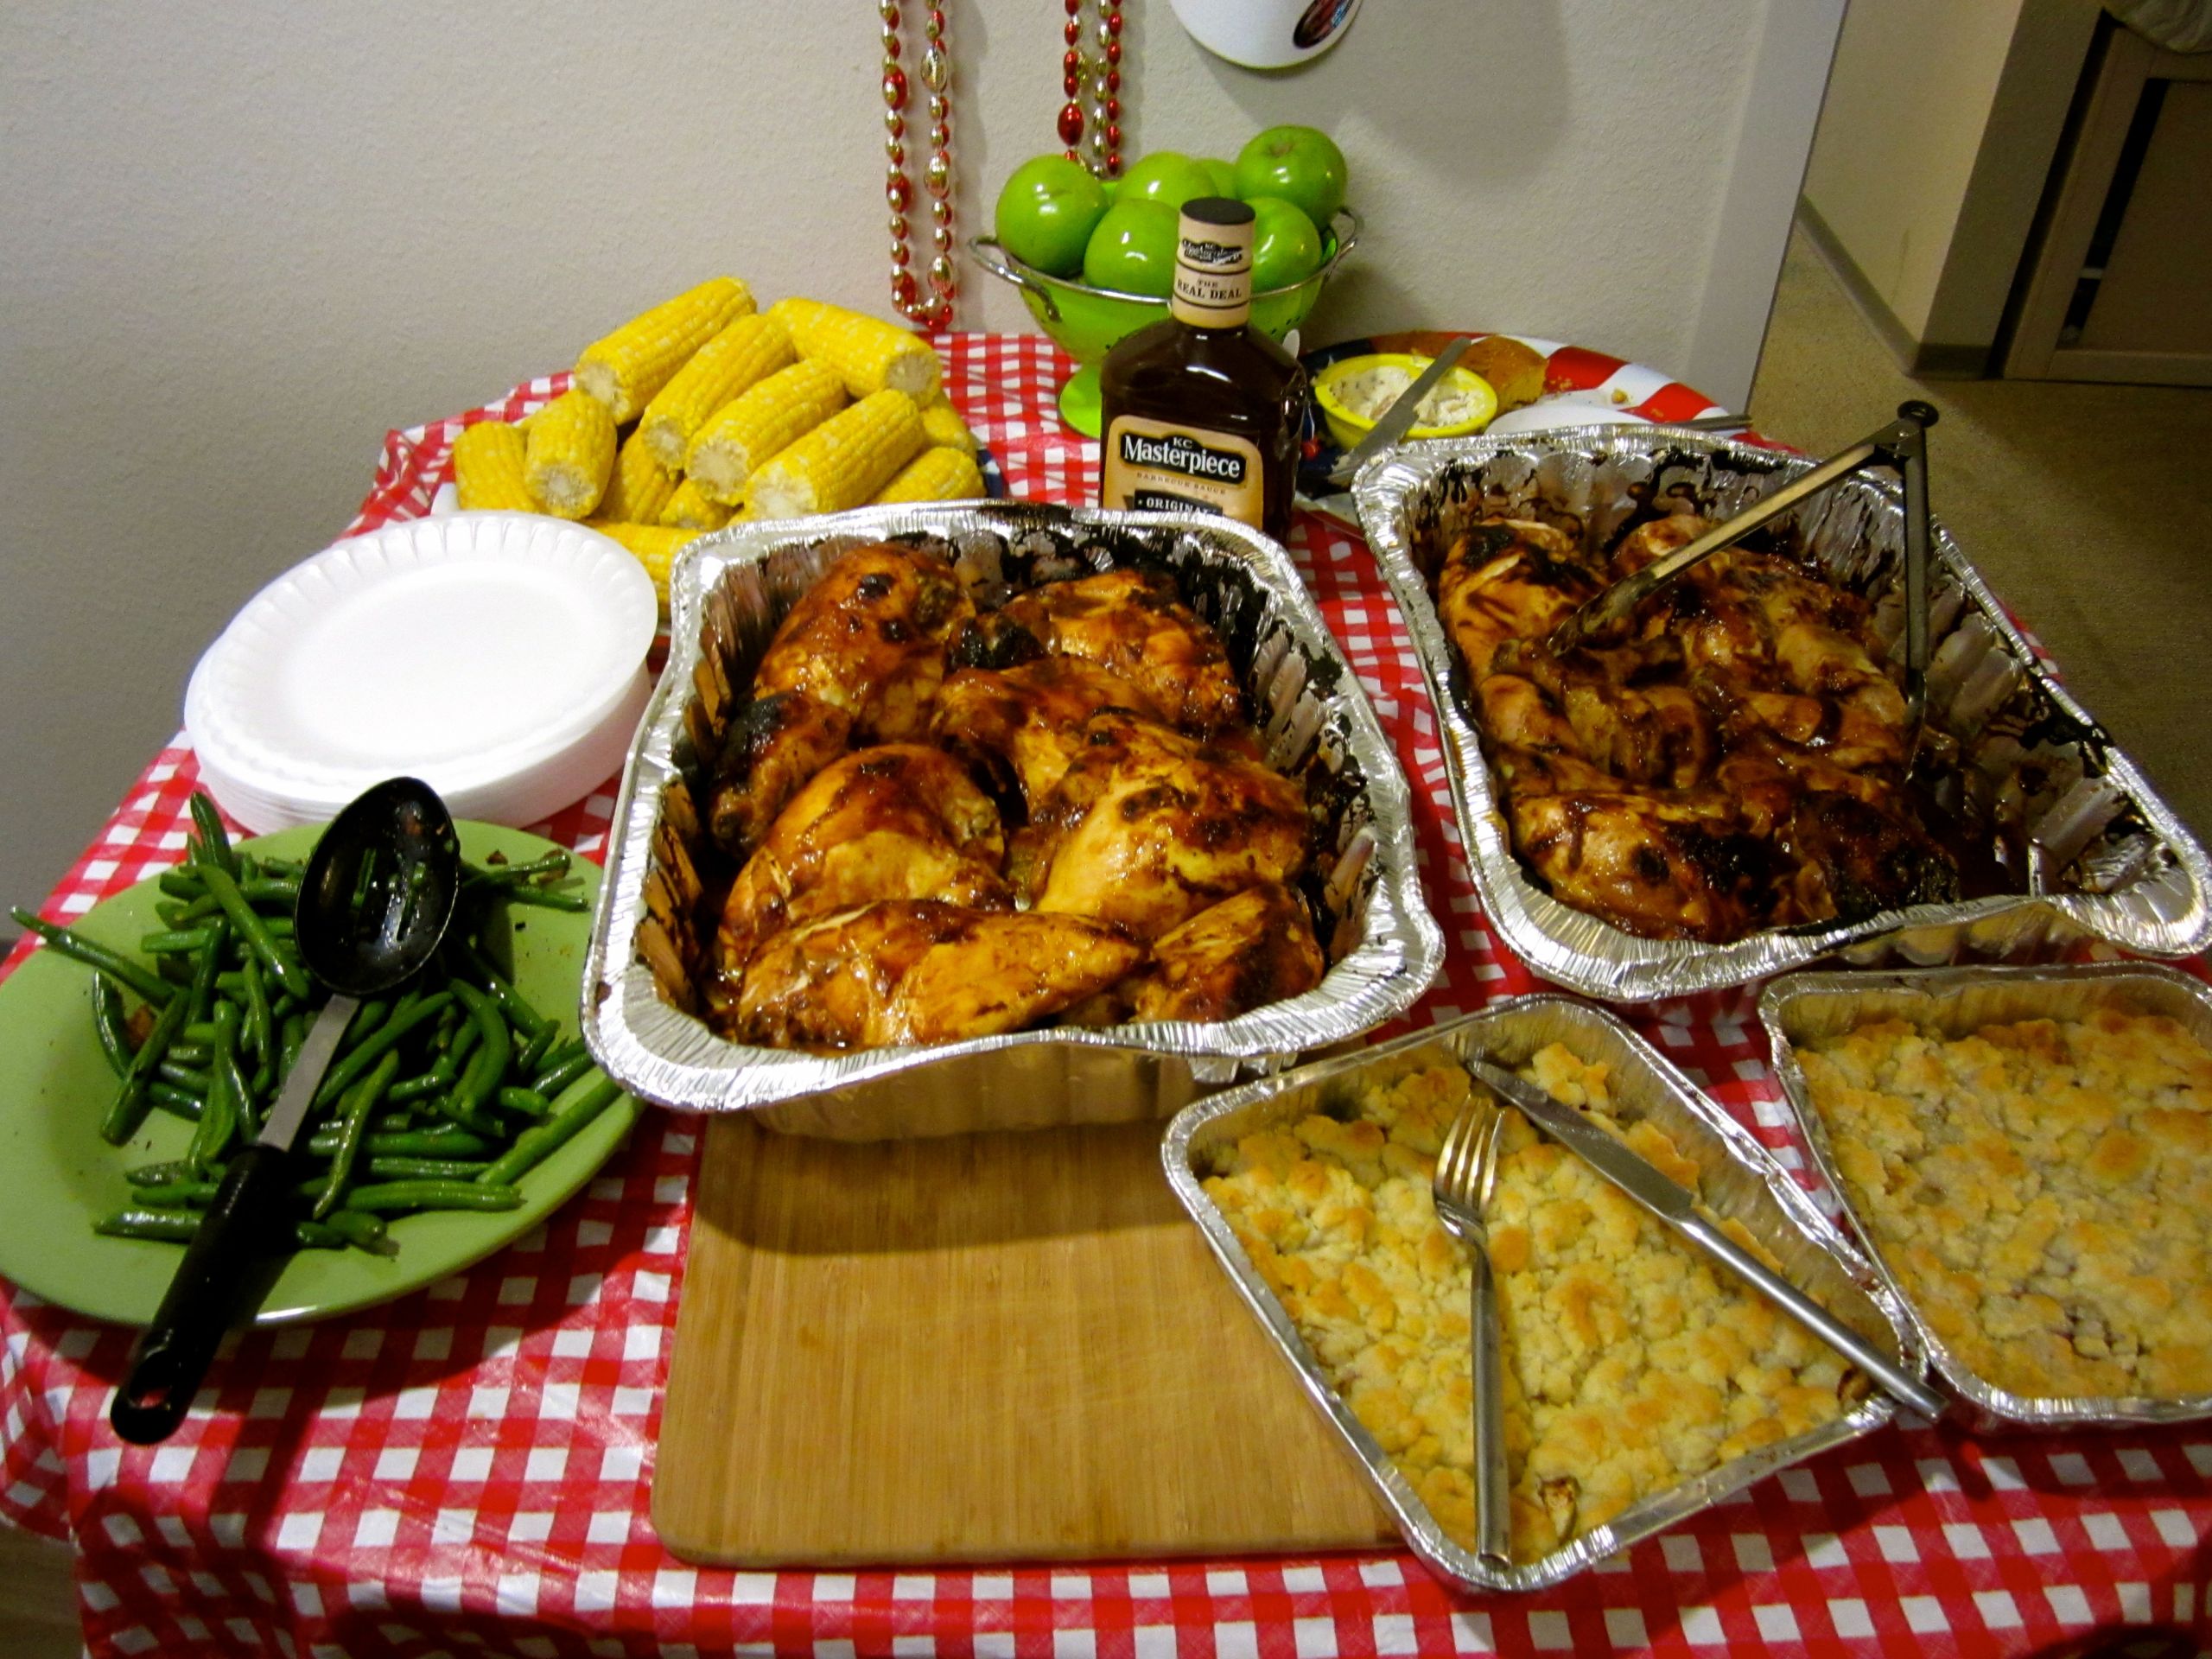 Food Ideas For Dinner Party
 All American Dinner Party